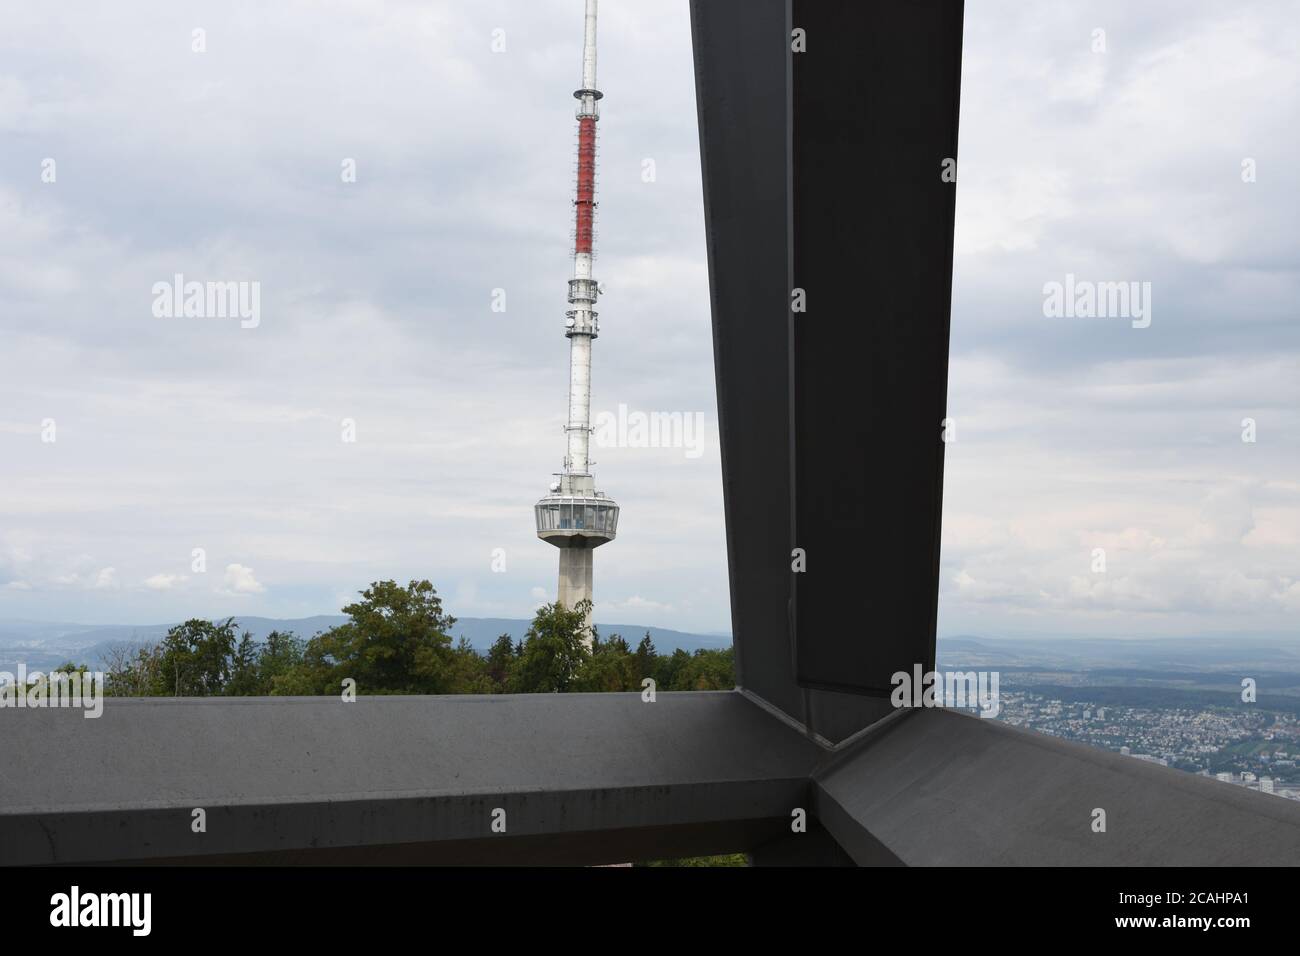 Observation Tower And Switzerland High Resolution Stock Photography and  Images - Alamy